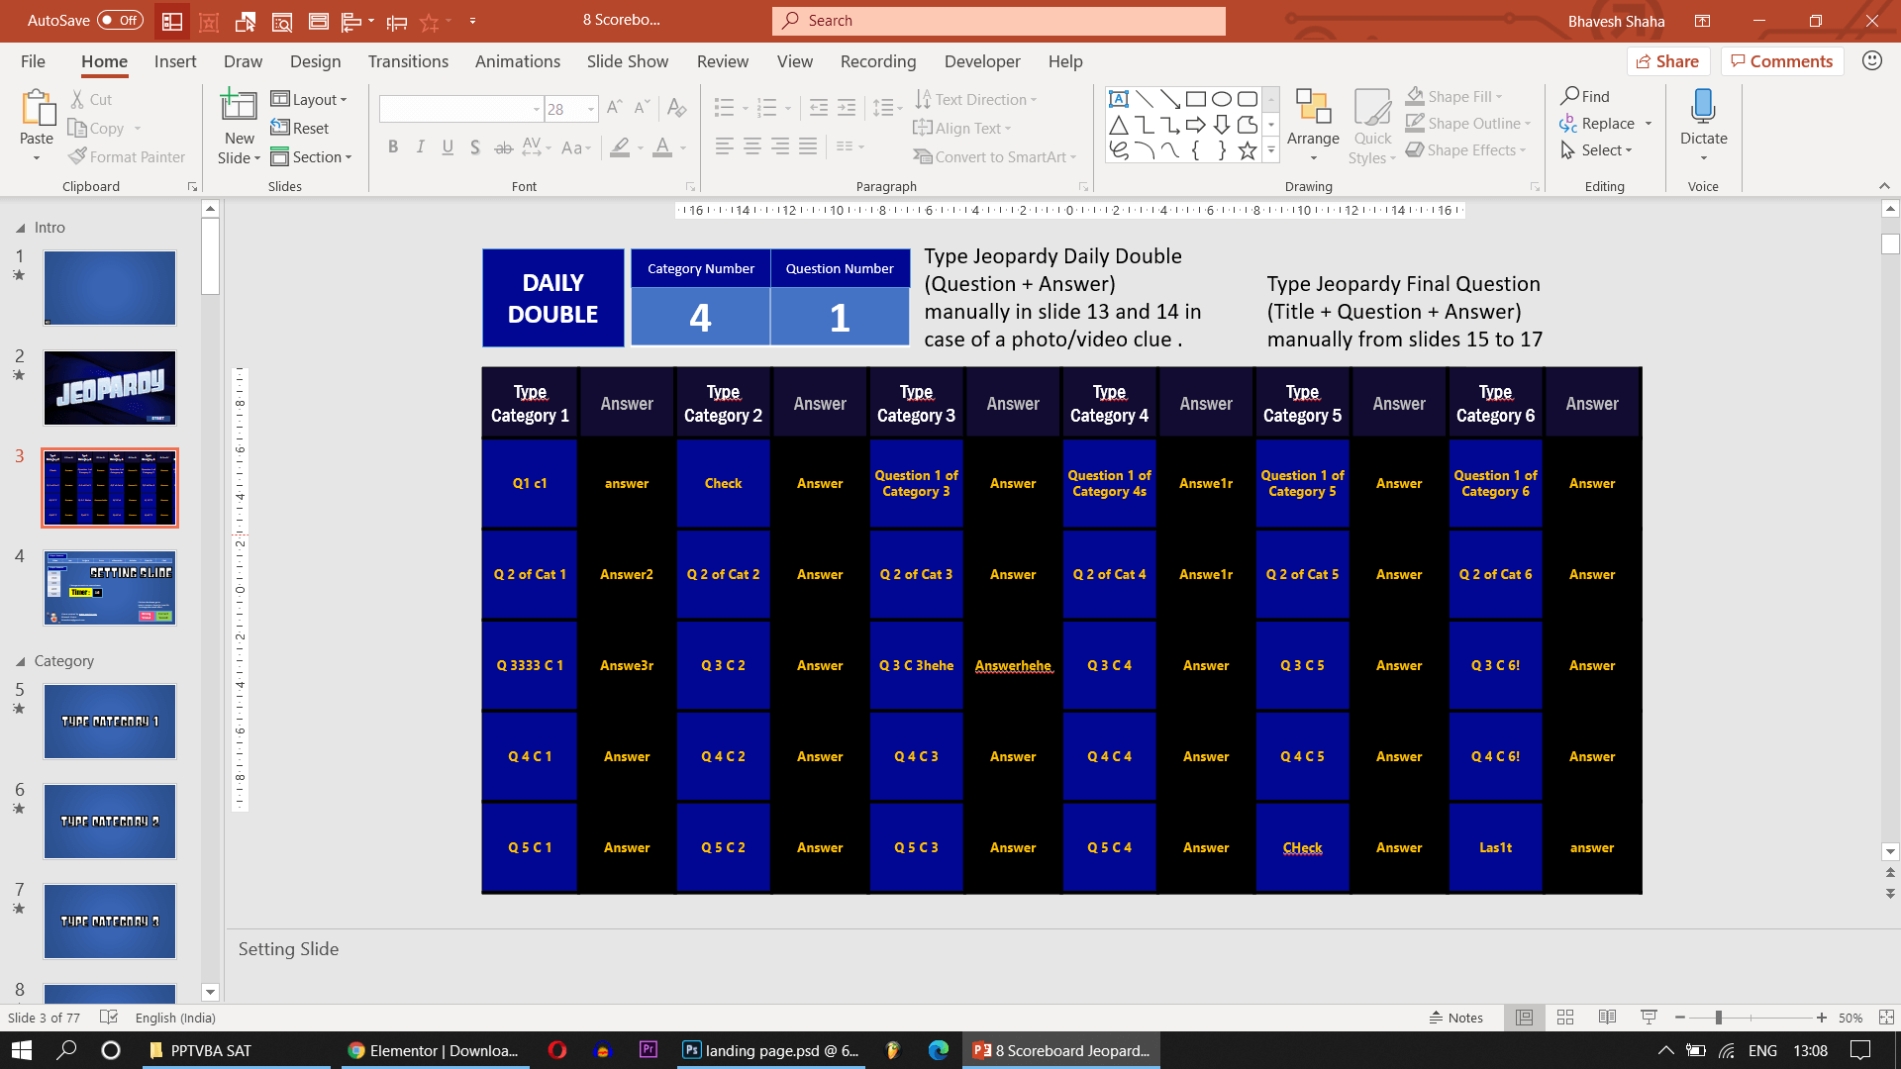 Download Jeopardy Powerpoint Template With Score Counter In Jeopardy Powerpoint Template With Score